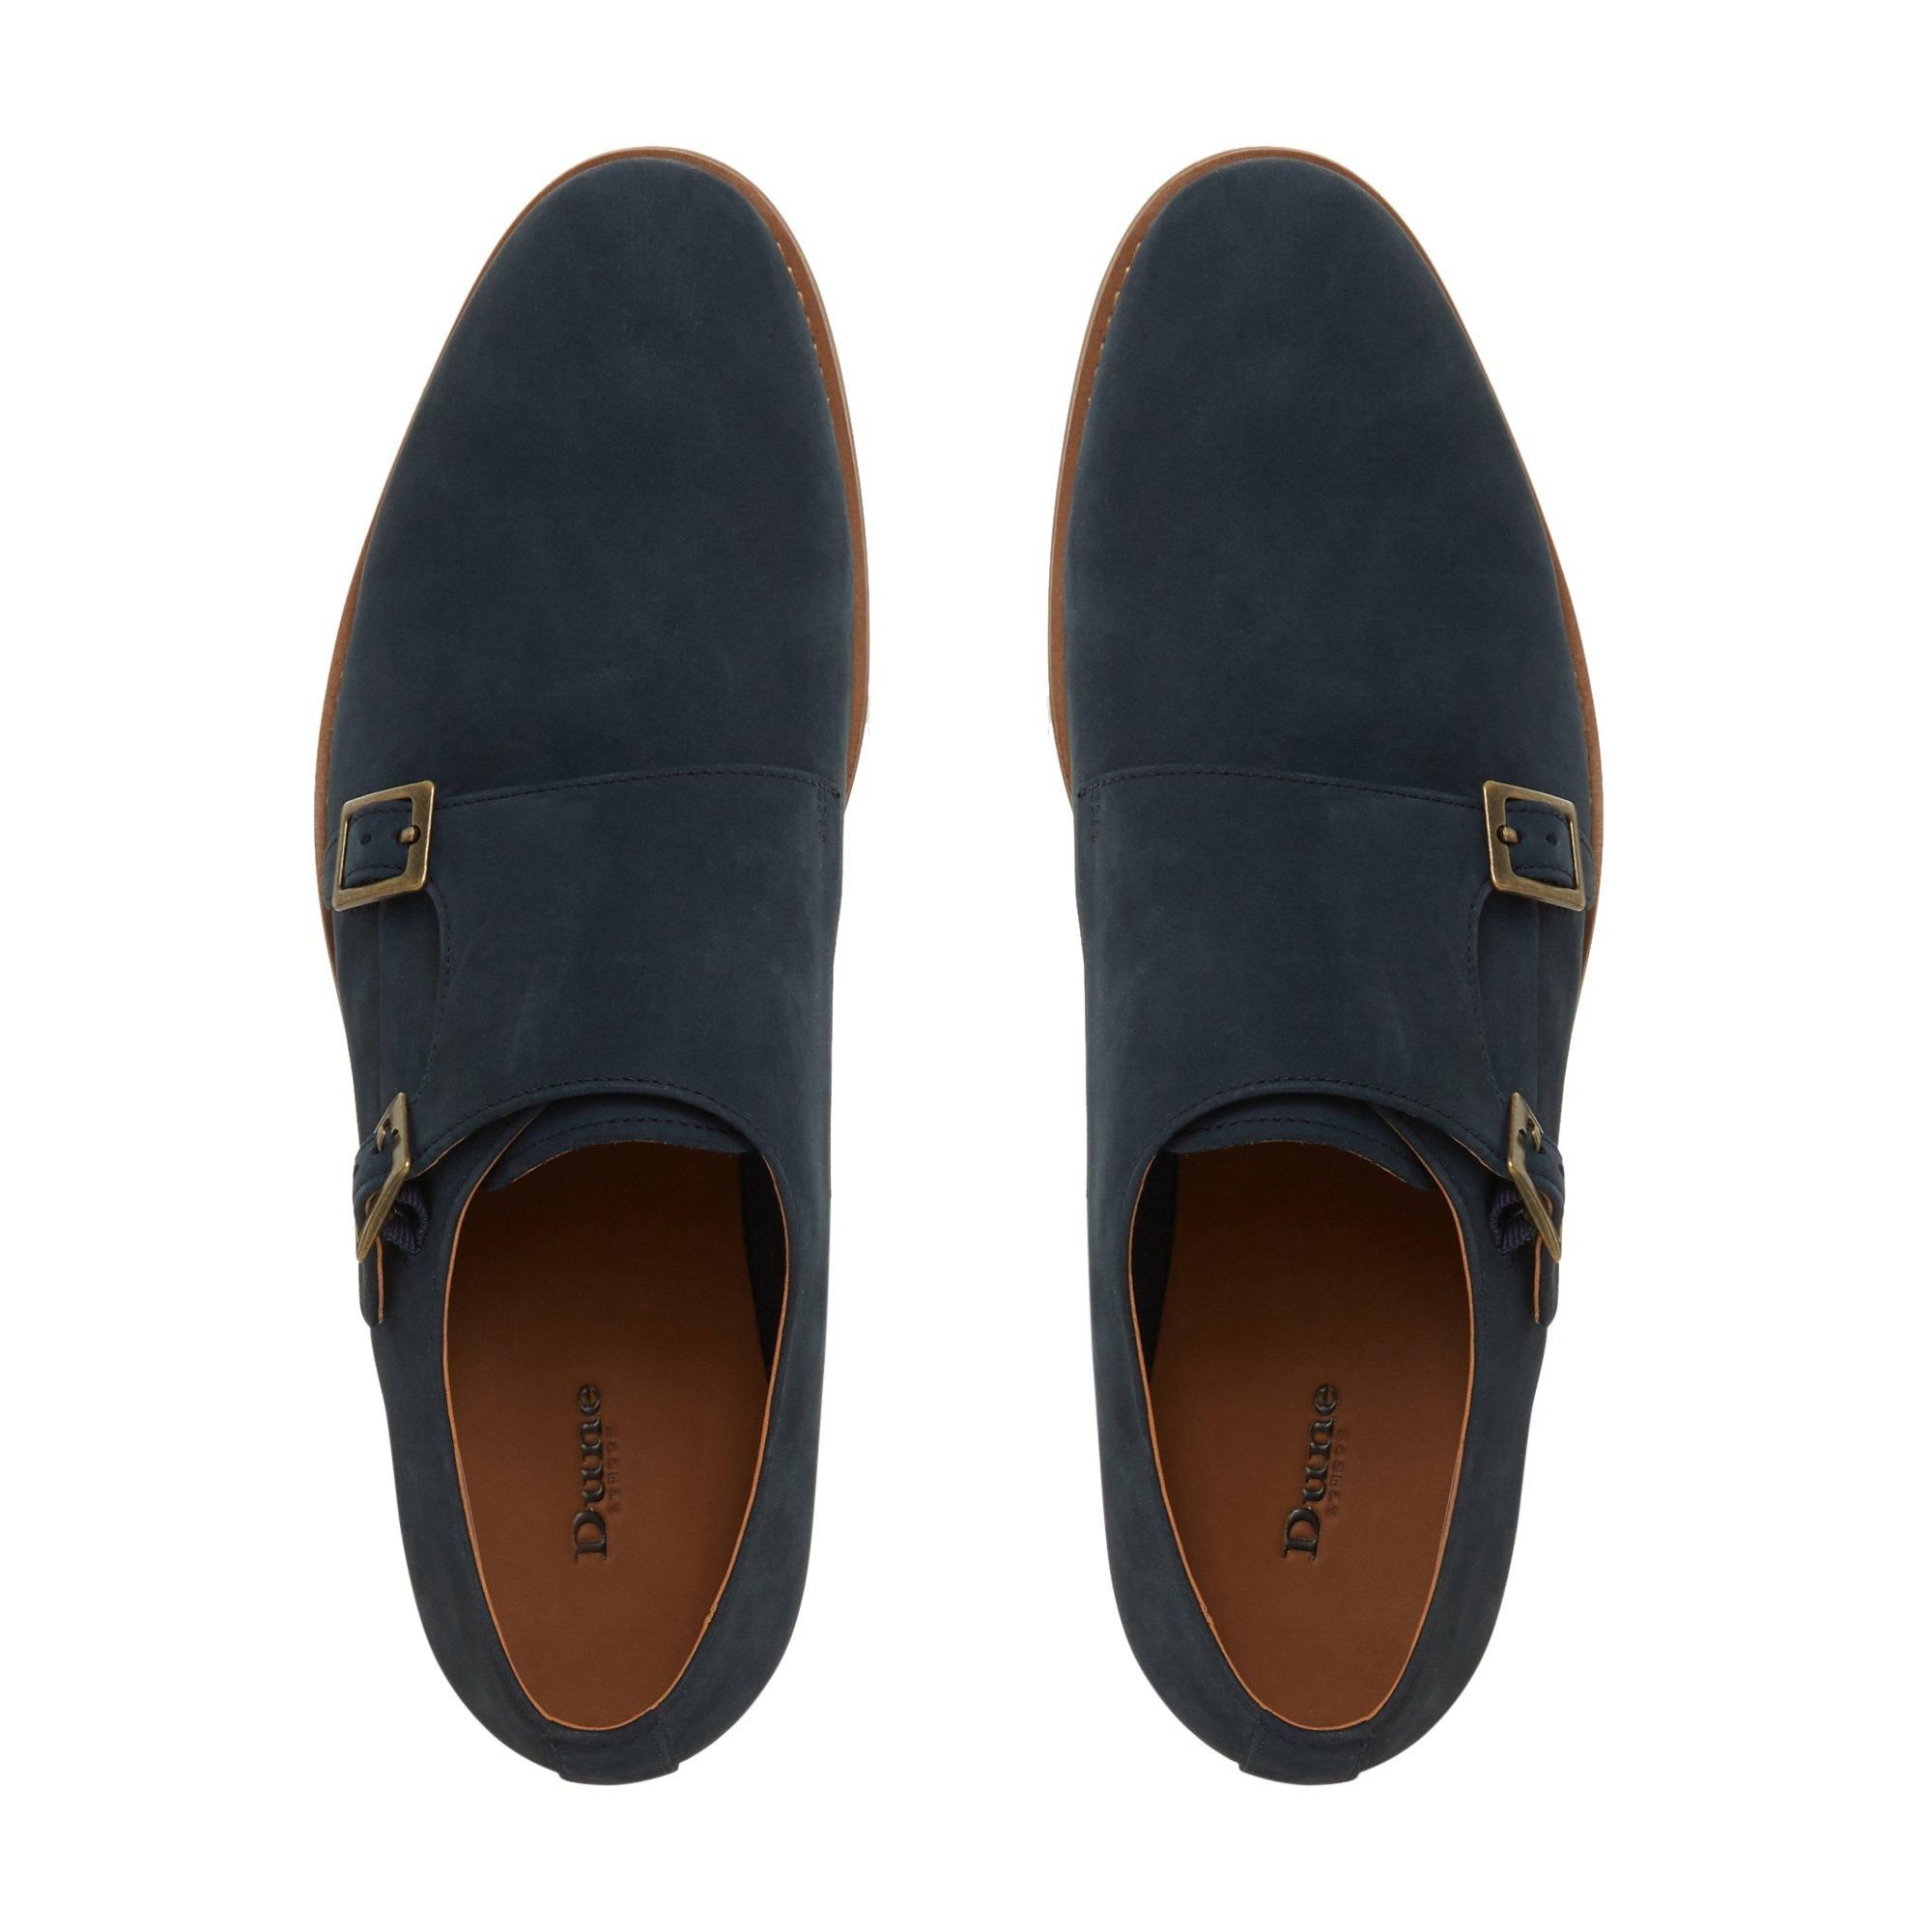 Upgrade your smart-casual wardrobe with this stylish monk shoe from Dune. Designed with a double buckle fastening and a textured upper. A stacked block heel and contrast sole finish the dapper design.